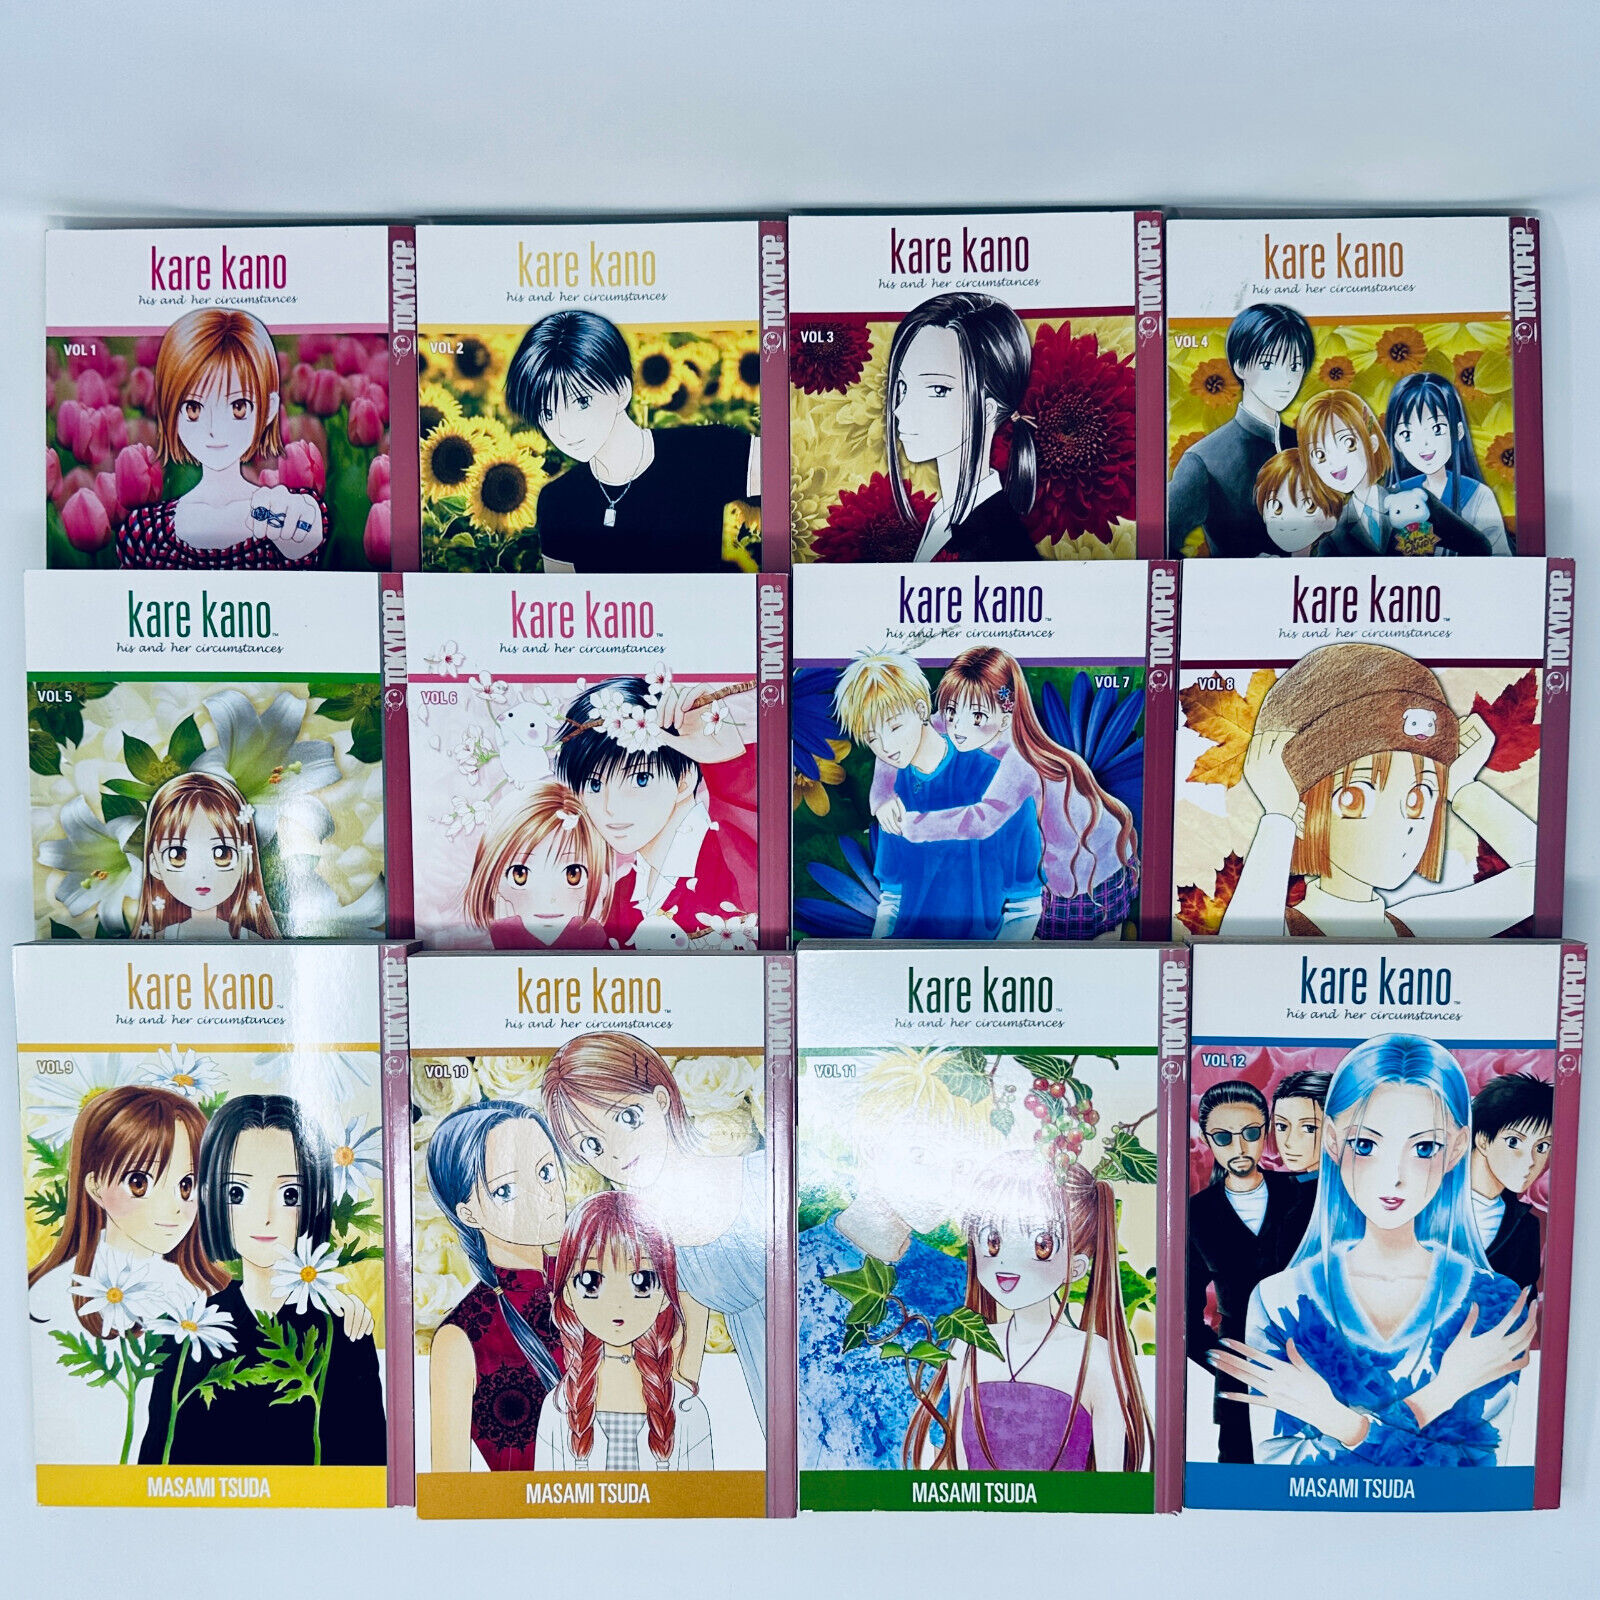 Kare Kano His and Her Circumstances Volume 1-12 Tokyopop 2003 First Printing